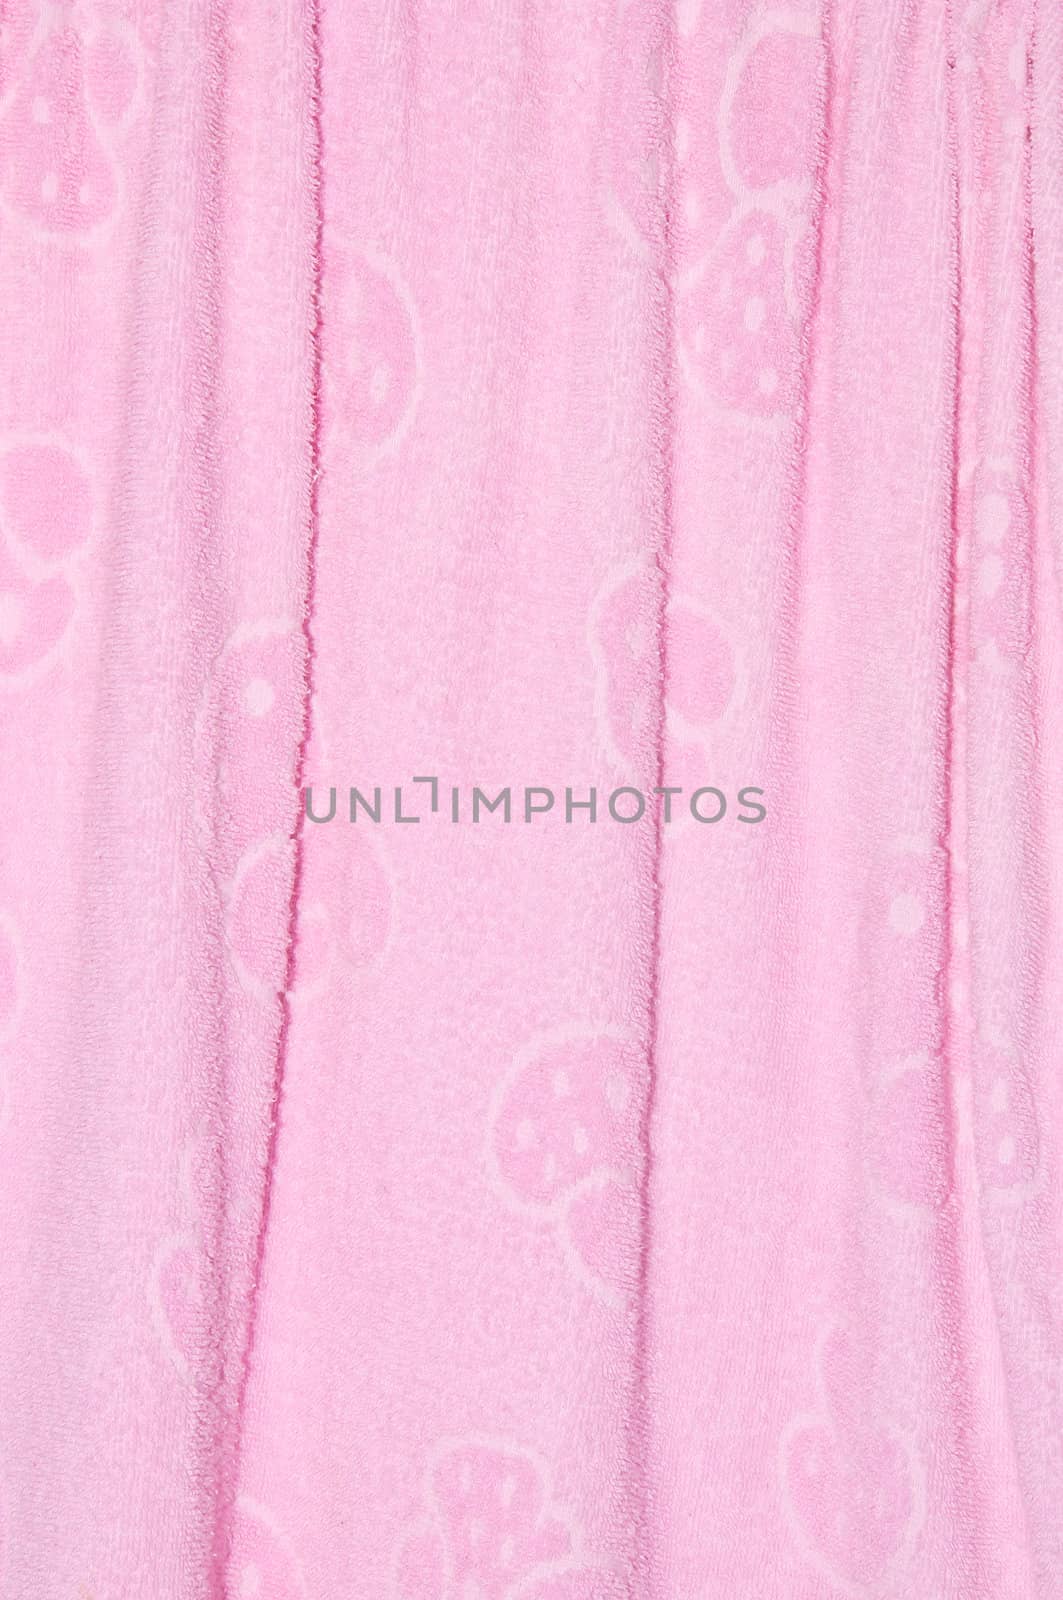 Pink curtains. by Theeraphon